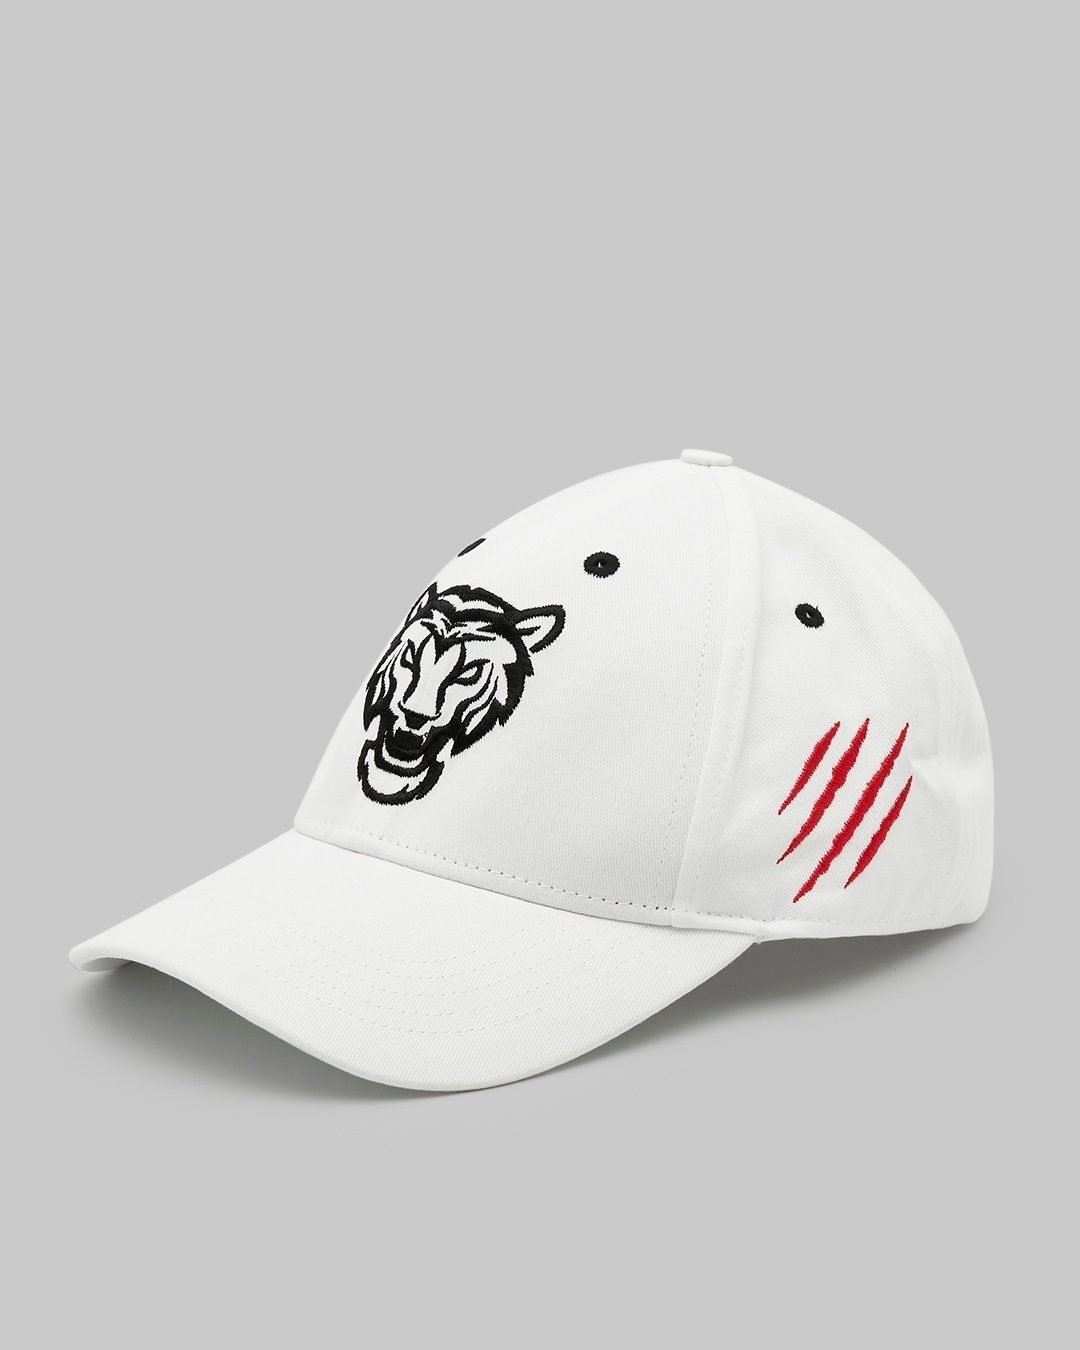 Unisex White Wild Cat Printed Baseball Cap paired with a green shirt